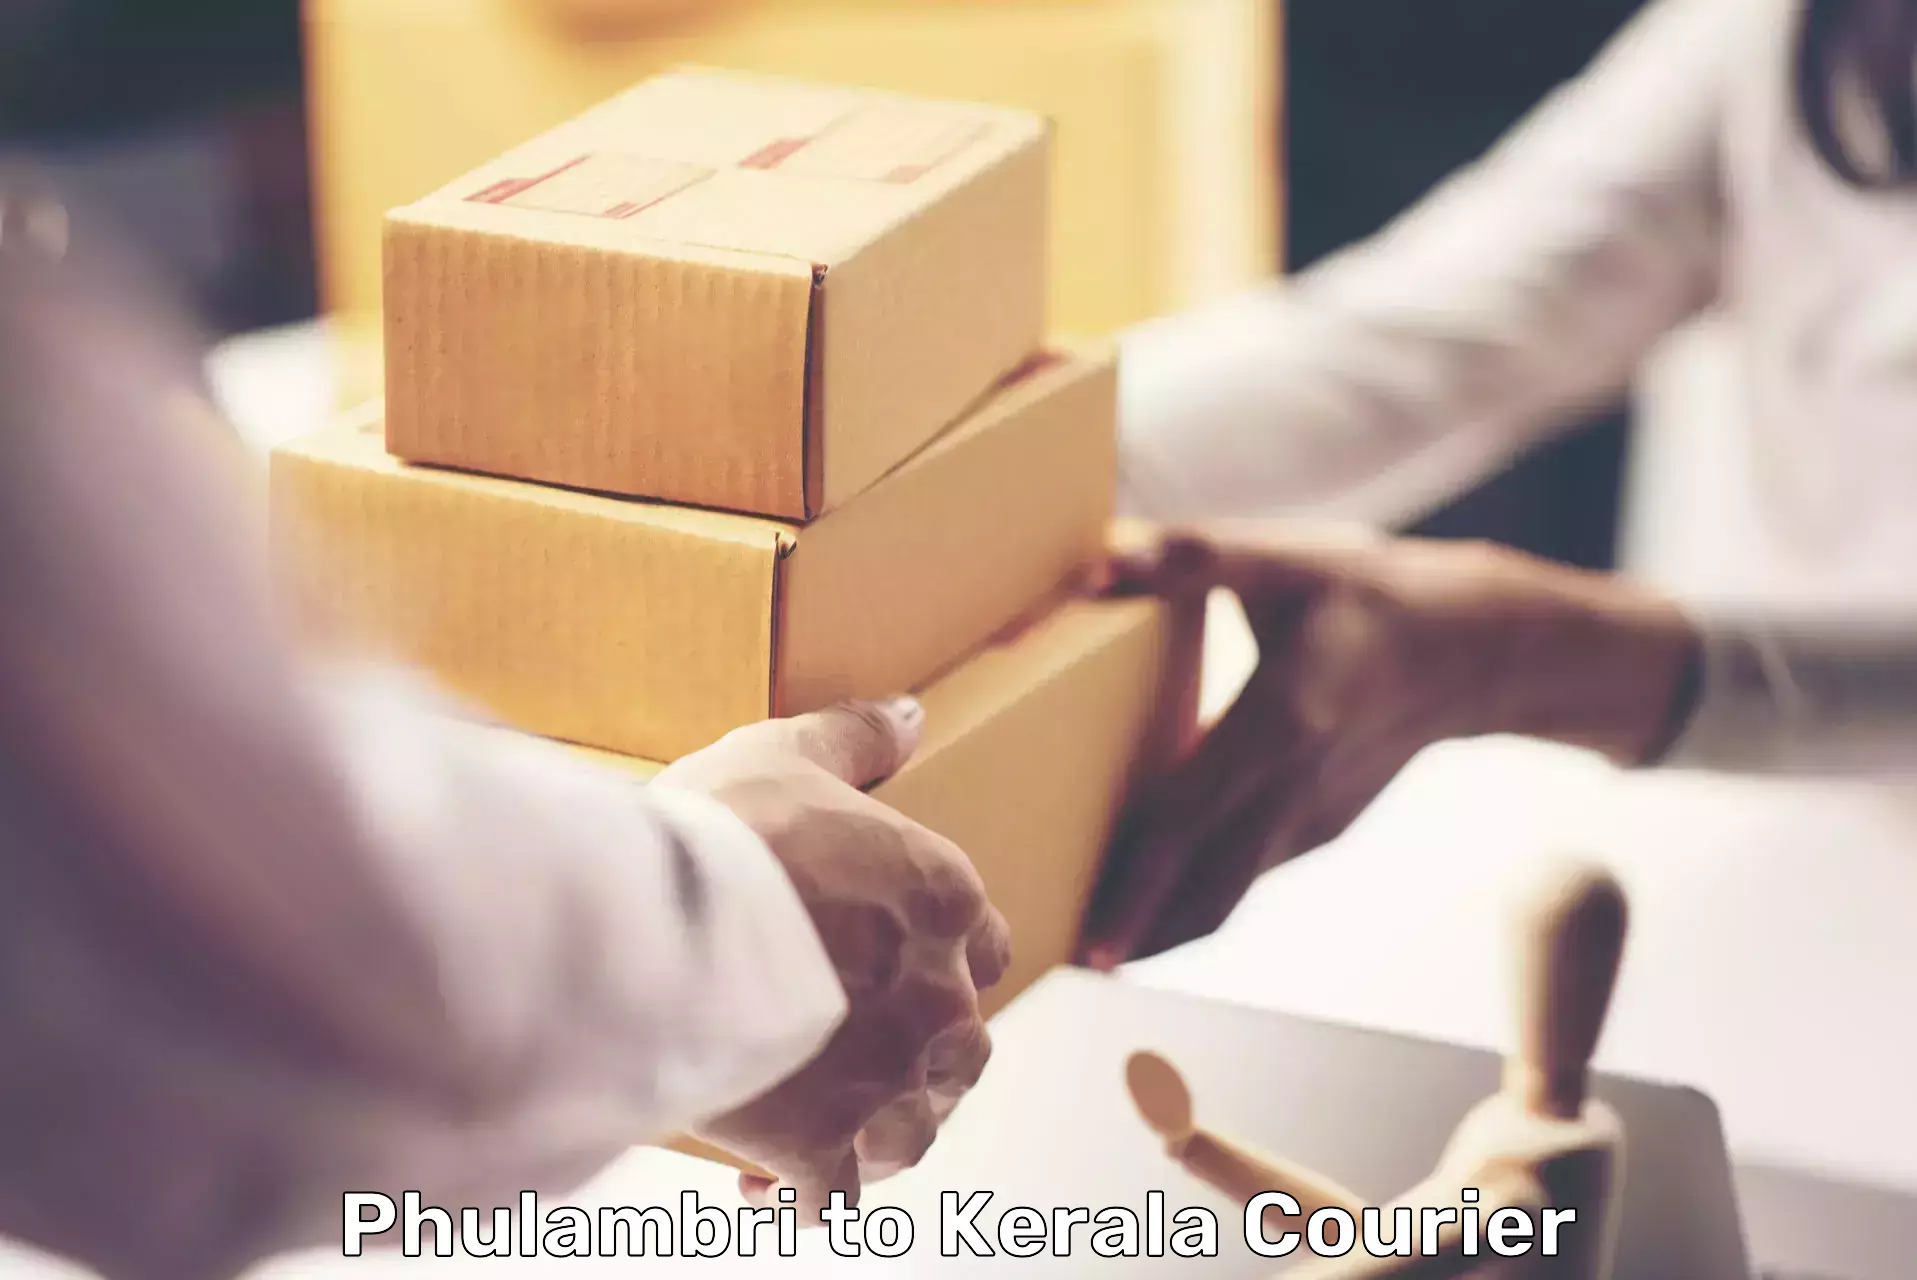 Personal courier services Phulambri to Kochi